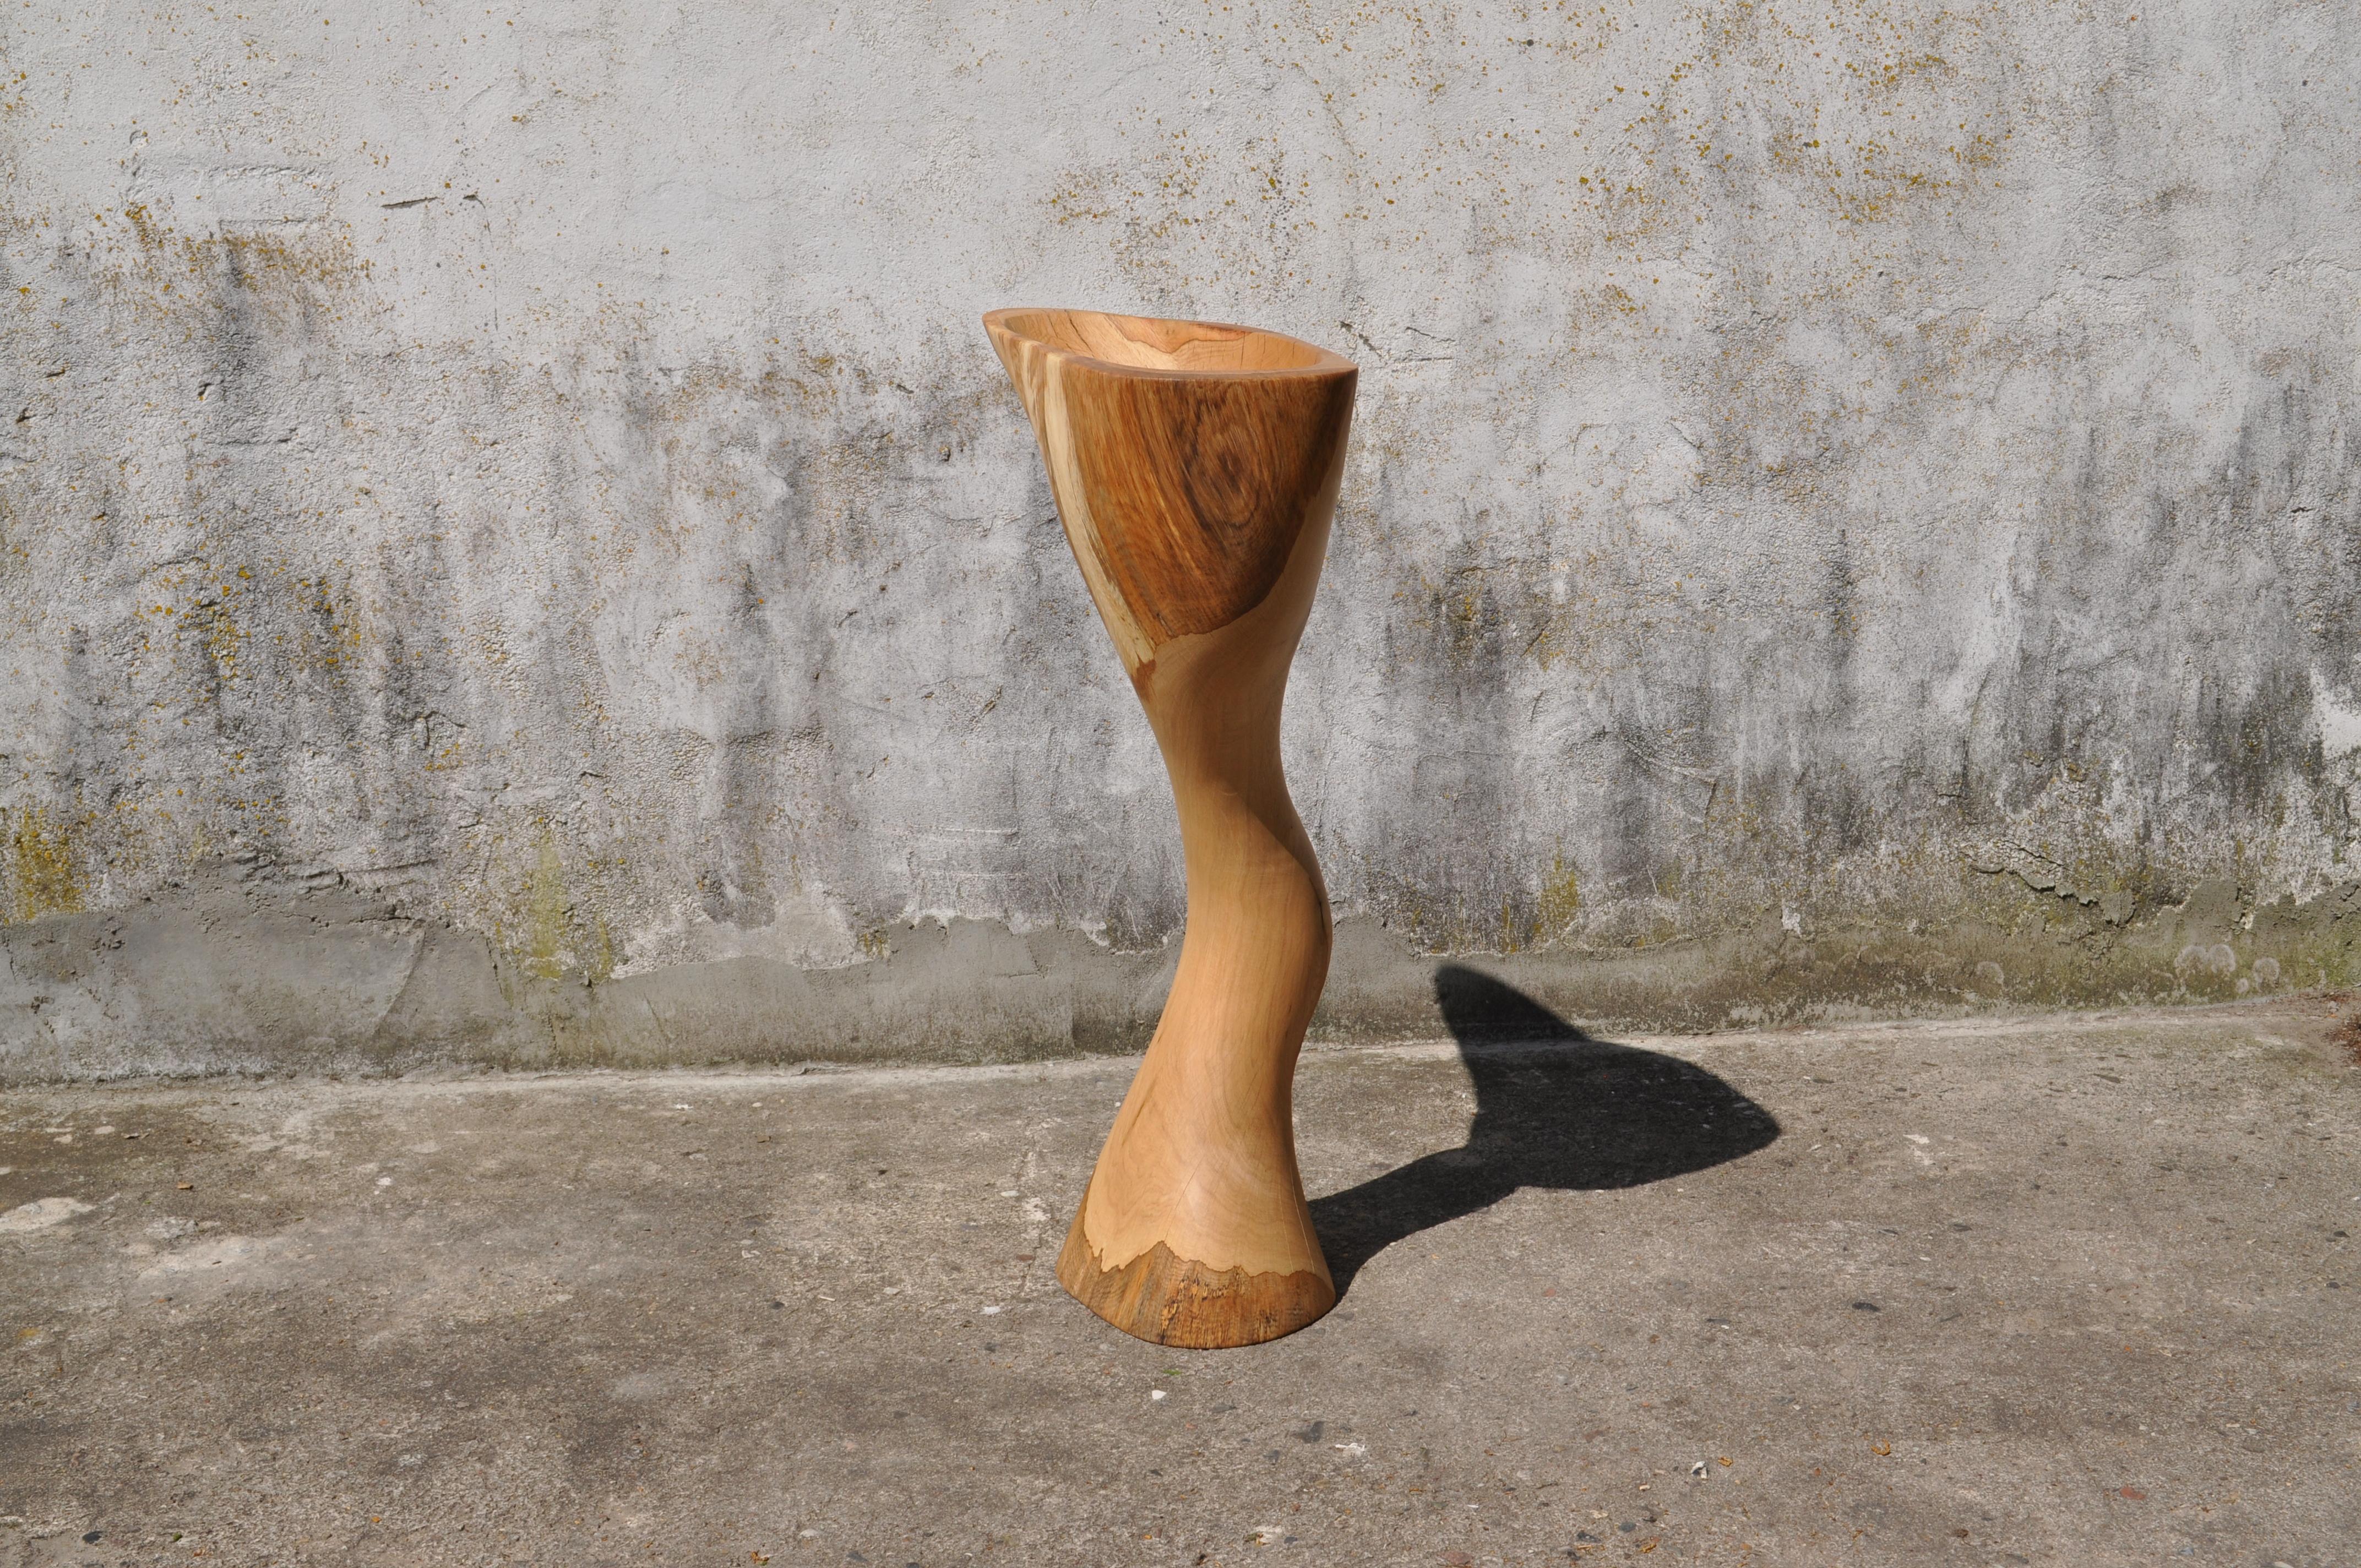 Vessel 1366 by Jörg Pietschmann
Dimensions: D 30 x W 61 x H 111 cm 
Materials: oak. 
Finish: polished oil finish.


Carved out of from a curved oak trunk.
In Pietschmann’s sculptures, trees that for centuries were part of a landscape and founded in